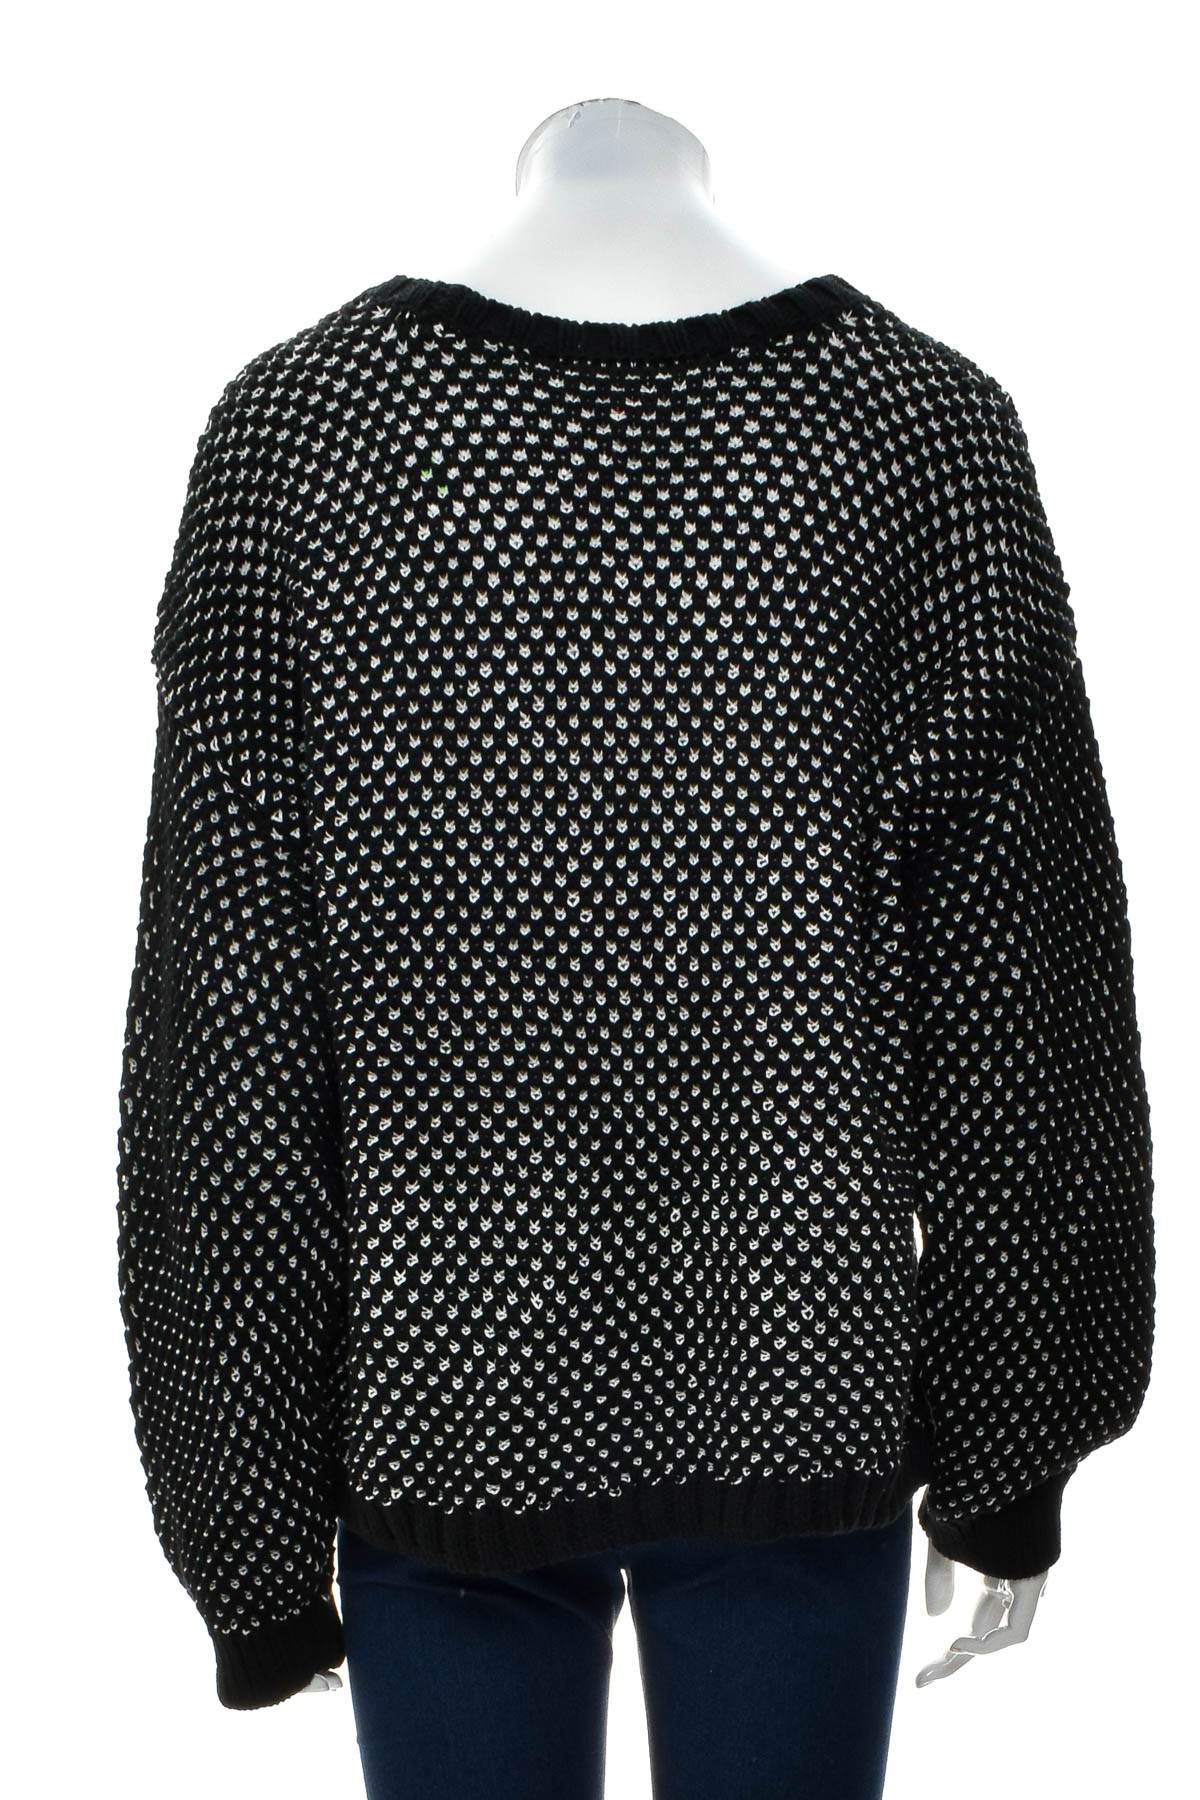 Women's sweater - VINCE CAMUTO - 1